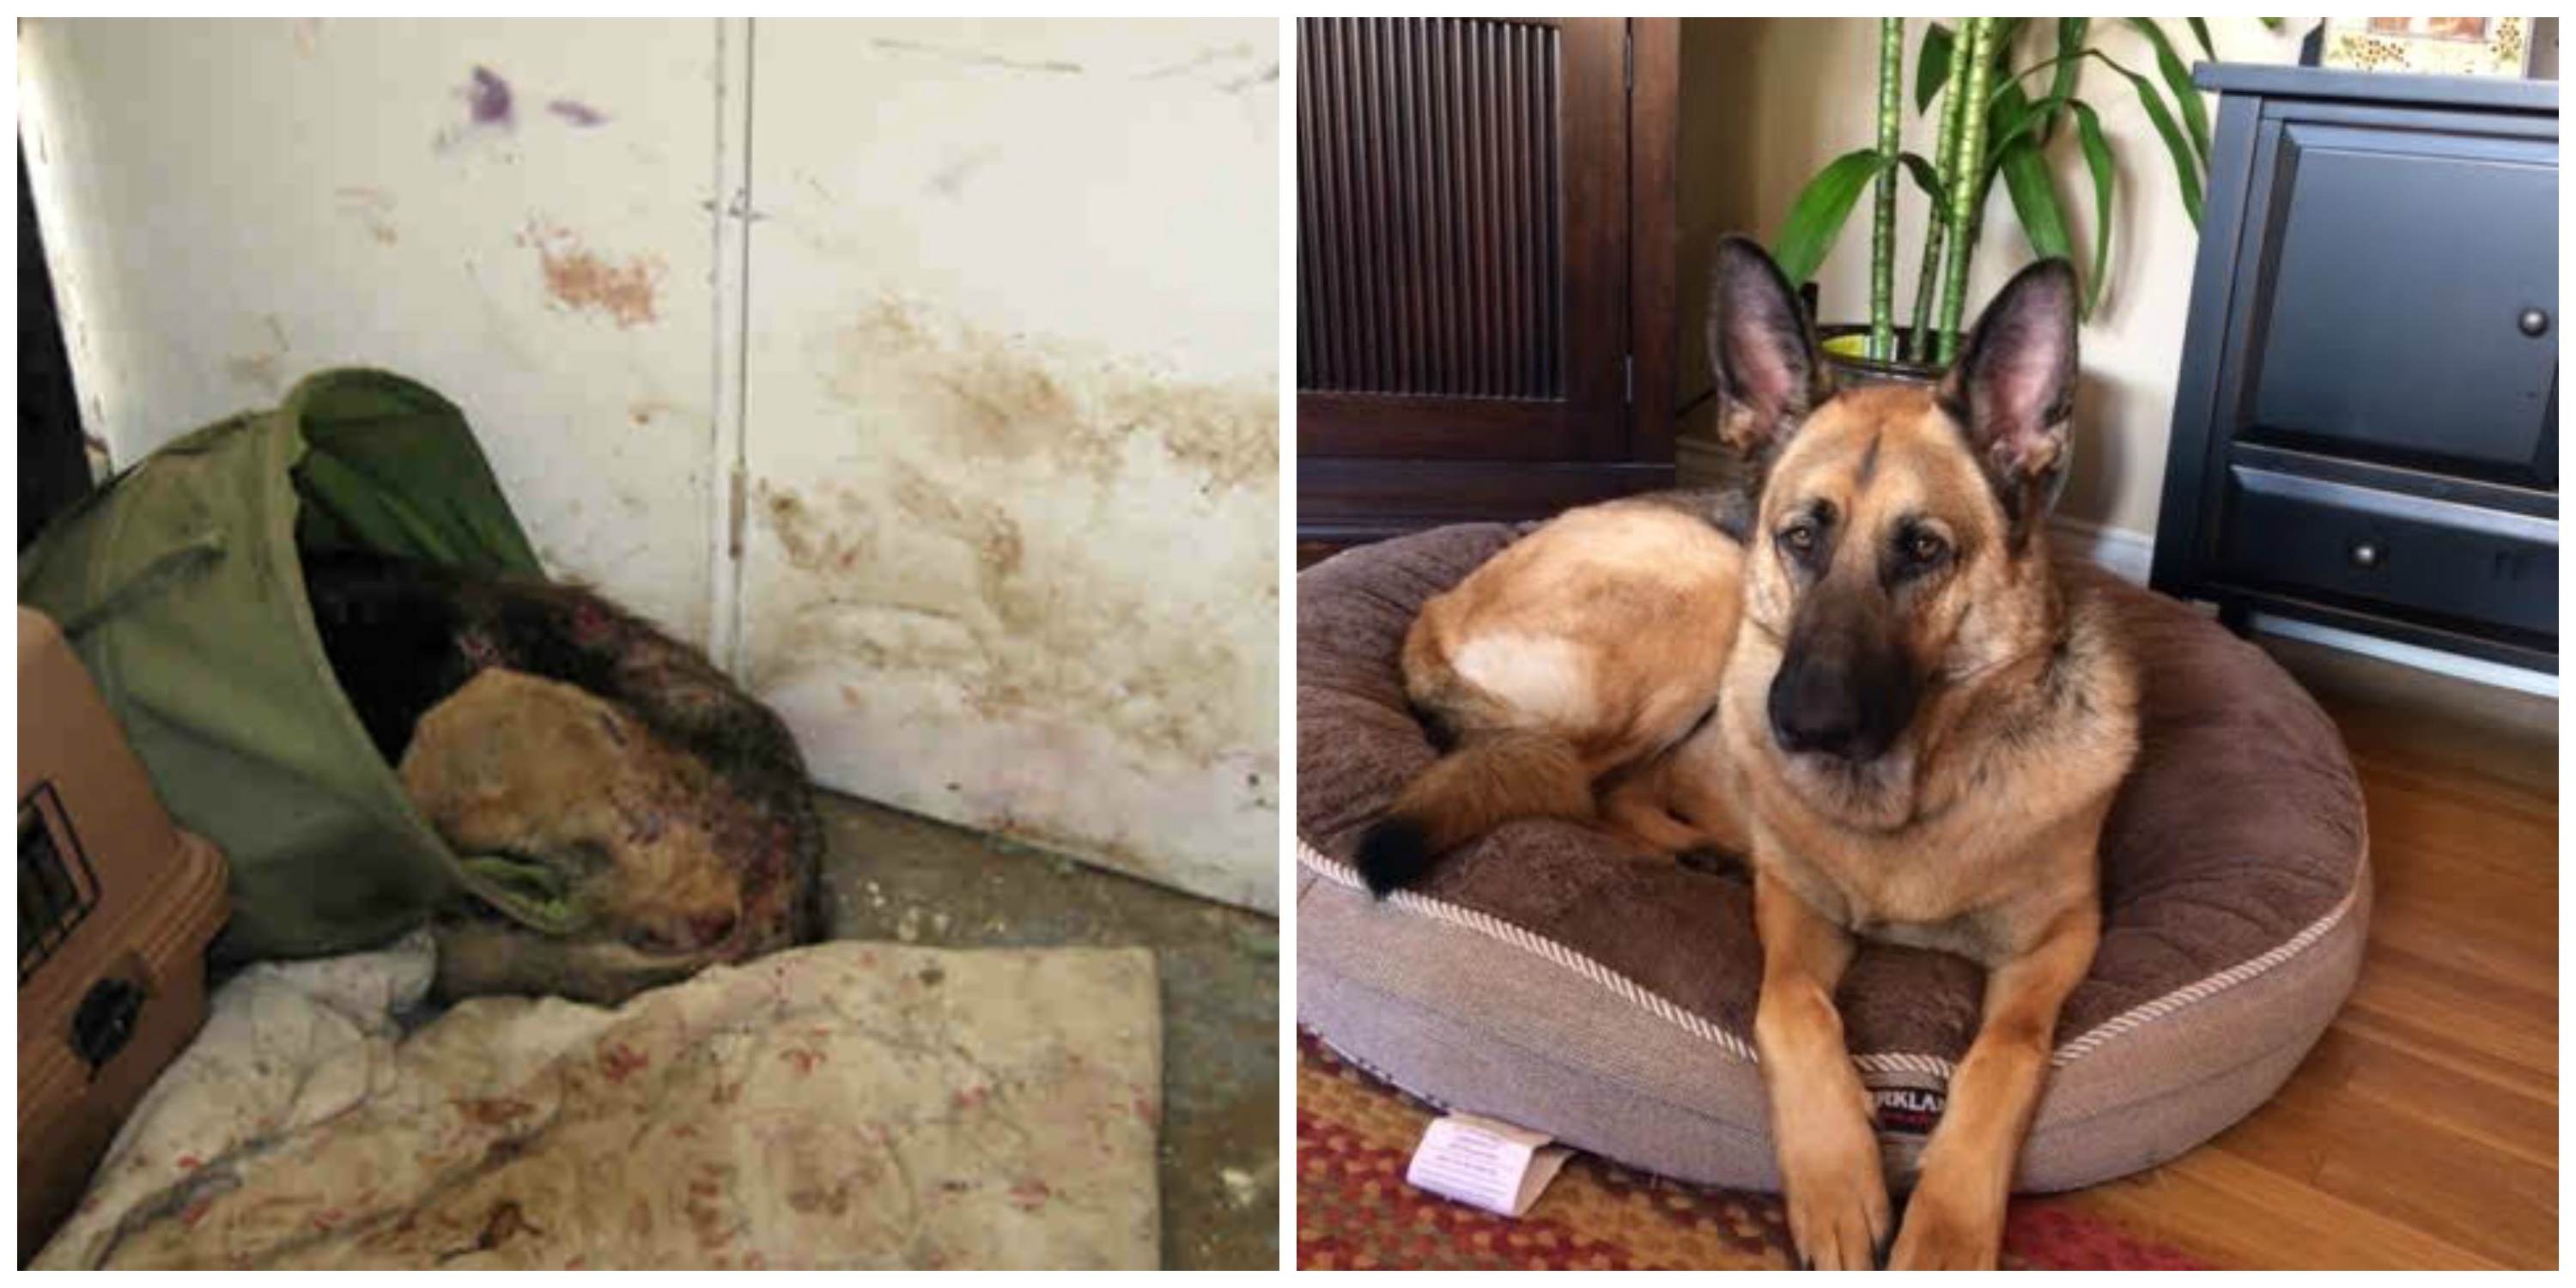 Living in a trash can, dying in a back yard. Help SCGSR make a difference for more dogs.